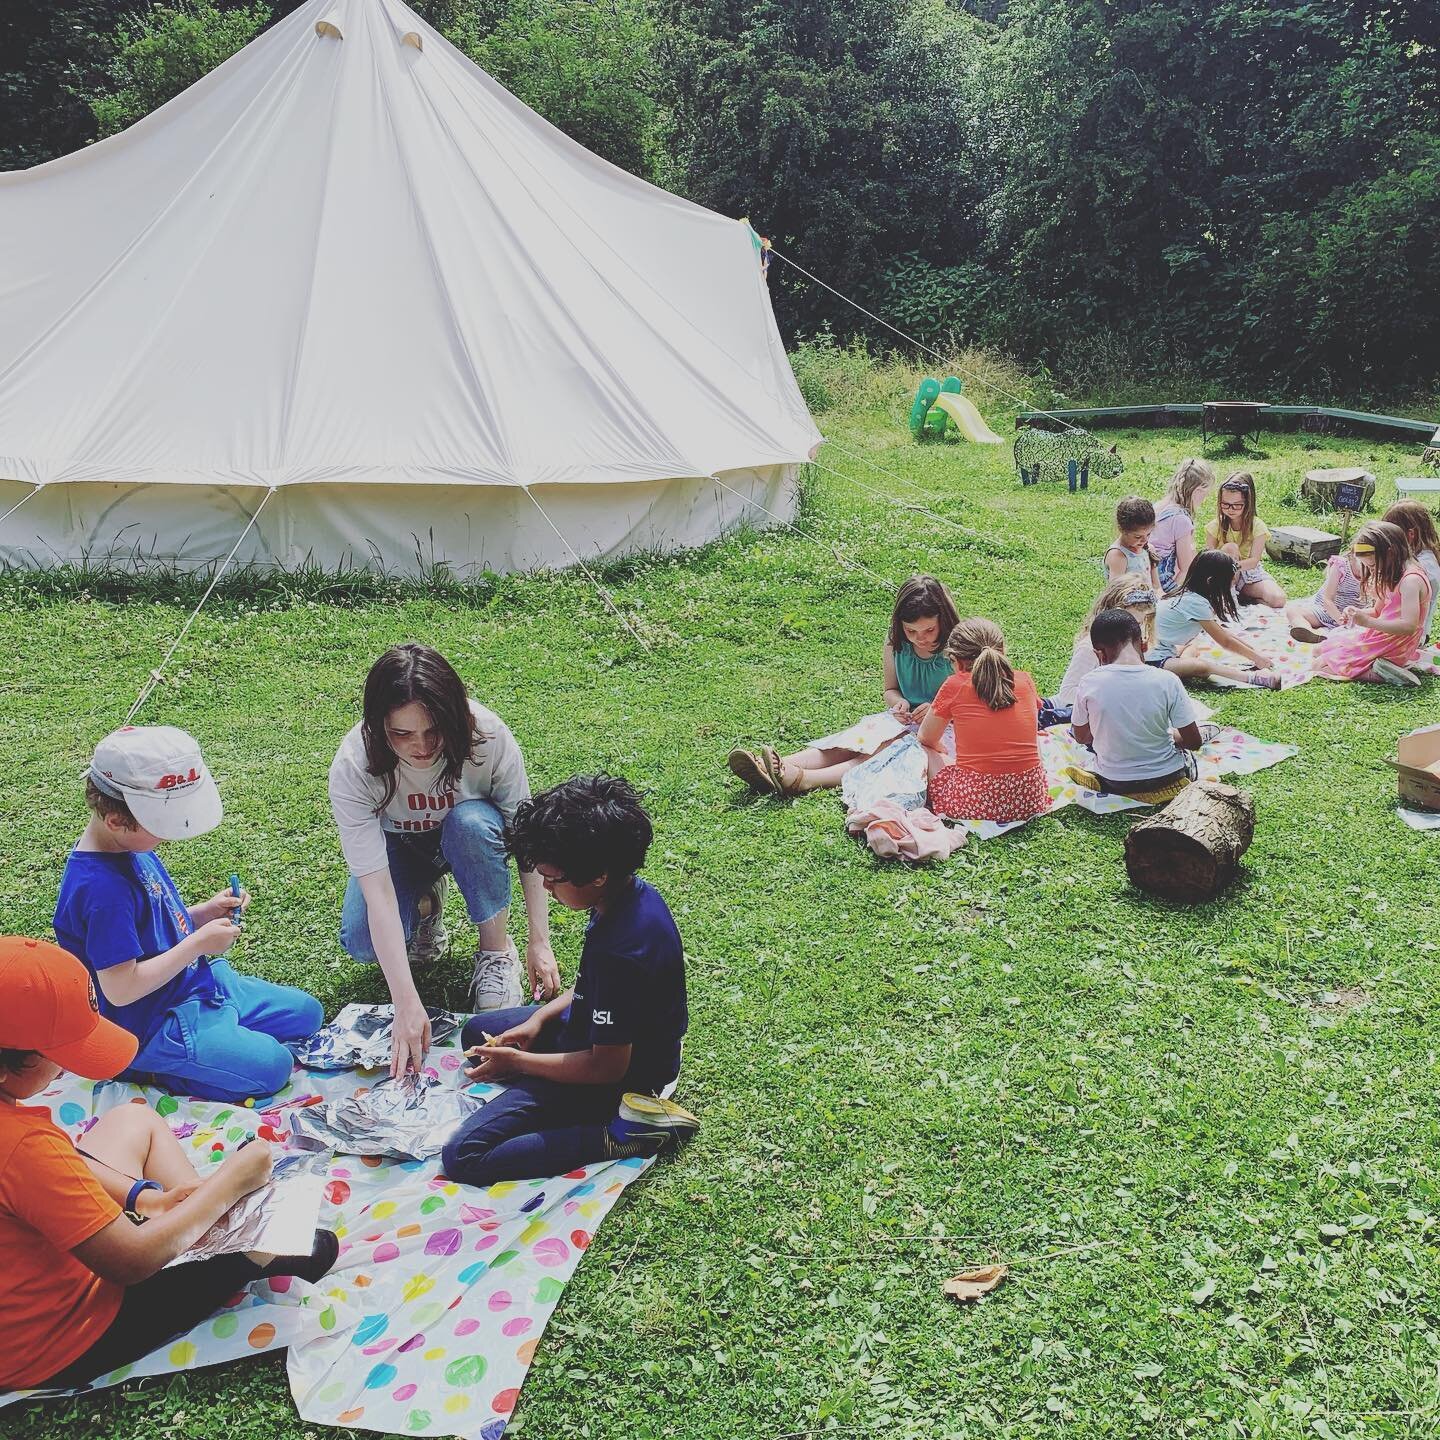 Secret spy gadget-ing going on! A little moment of building props for our sharing, but each prop has a story behind it... #storytelling #creativity #drama #theatre 

@outdoorplaybarn #performance #summercamp #glasgow